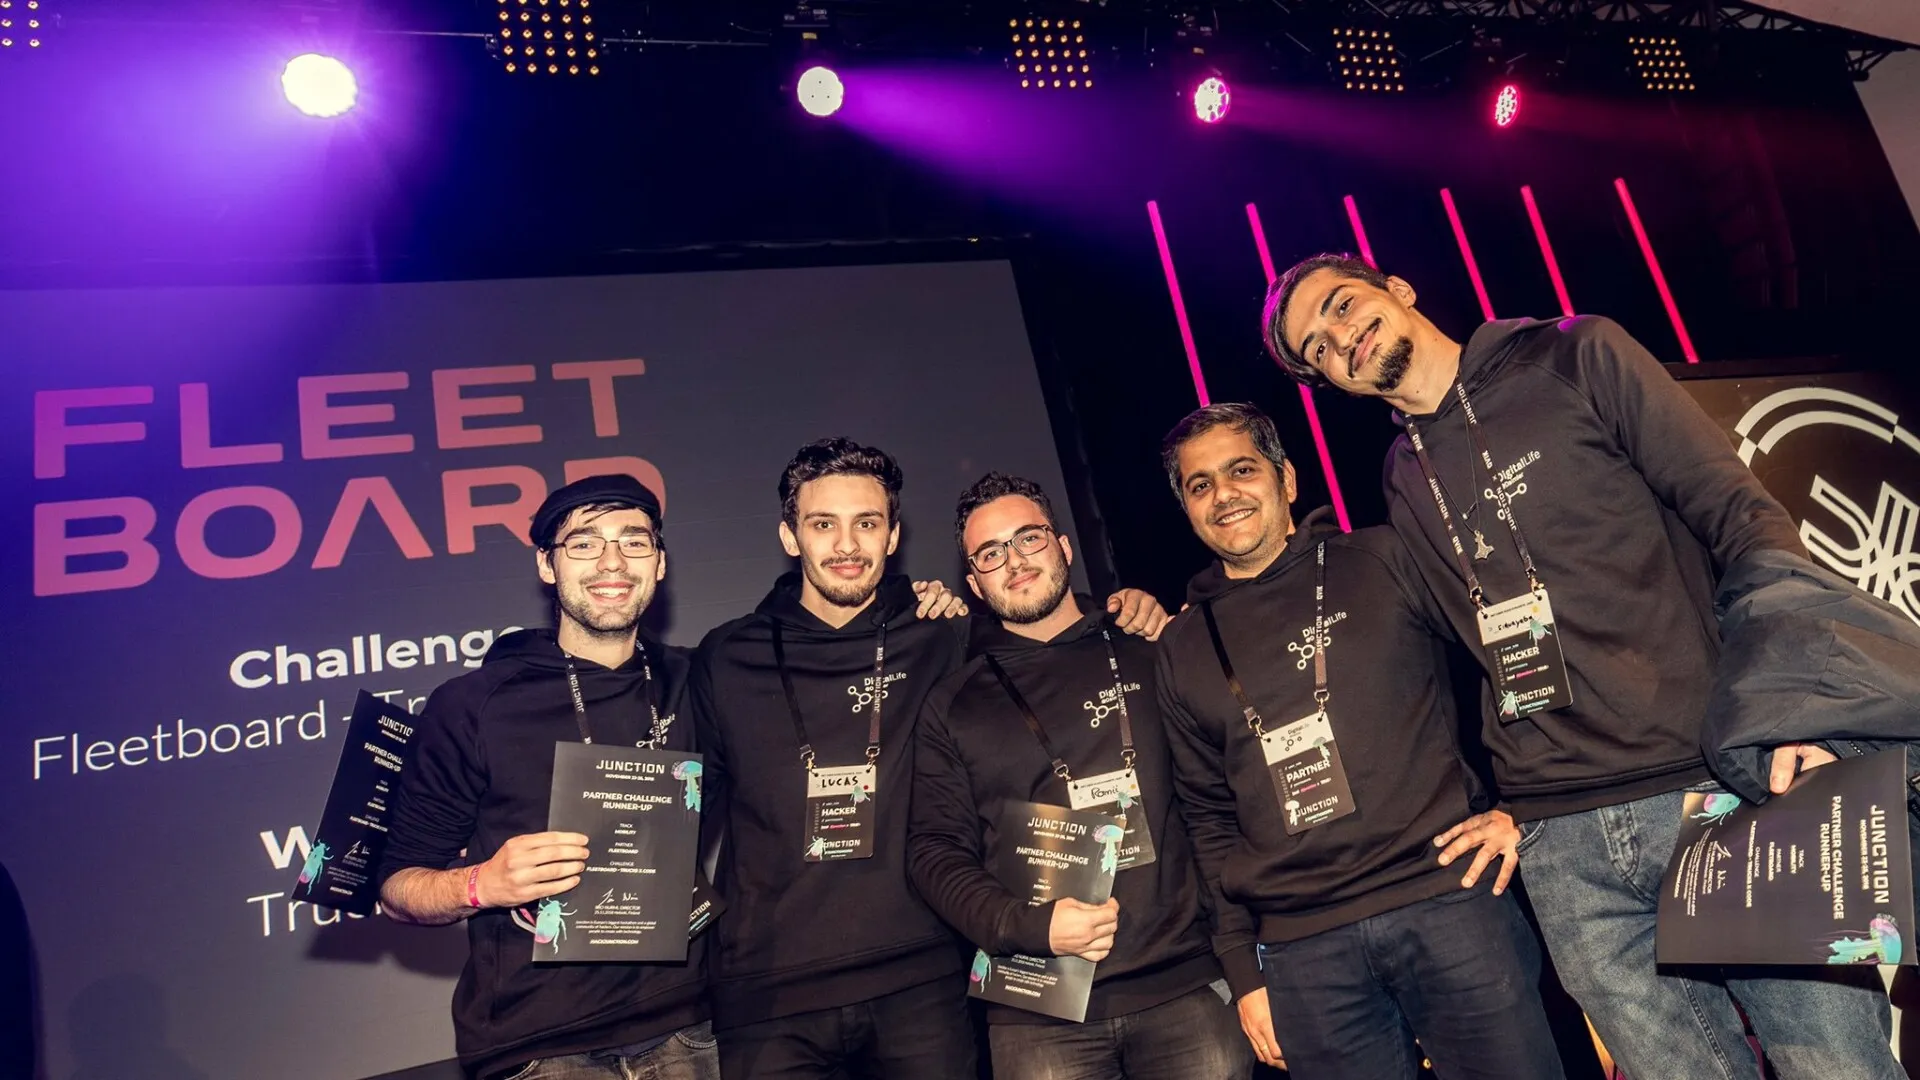 Winners at Junction 2018